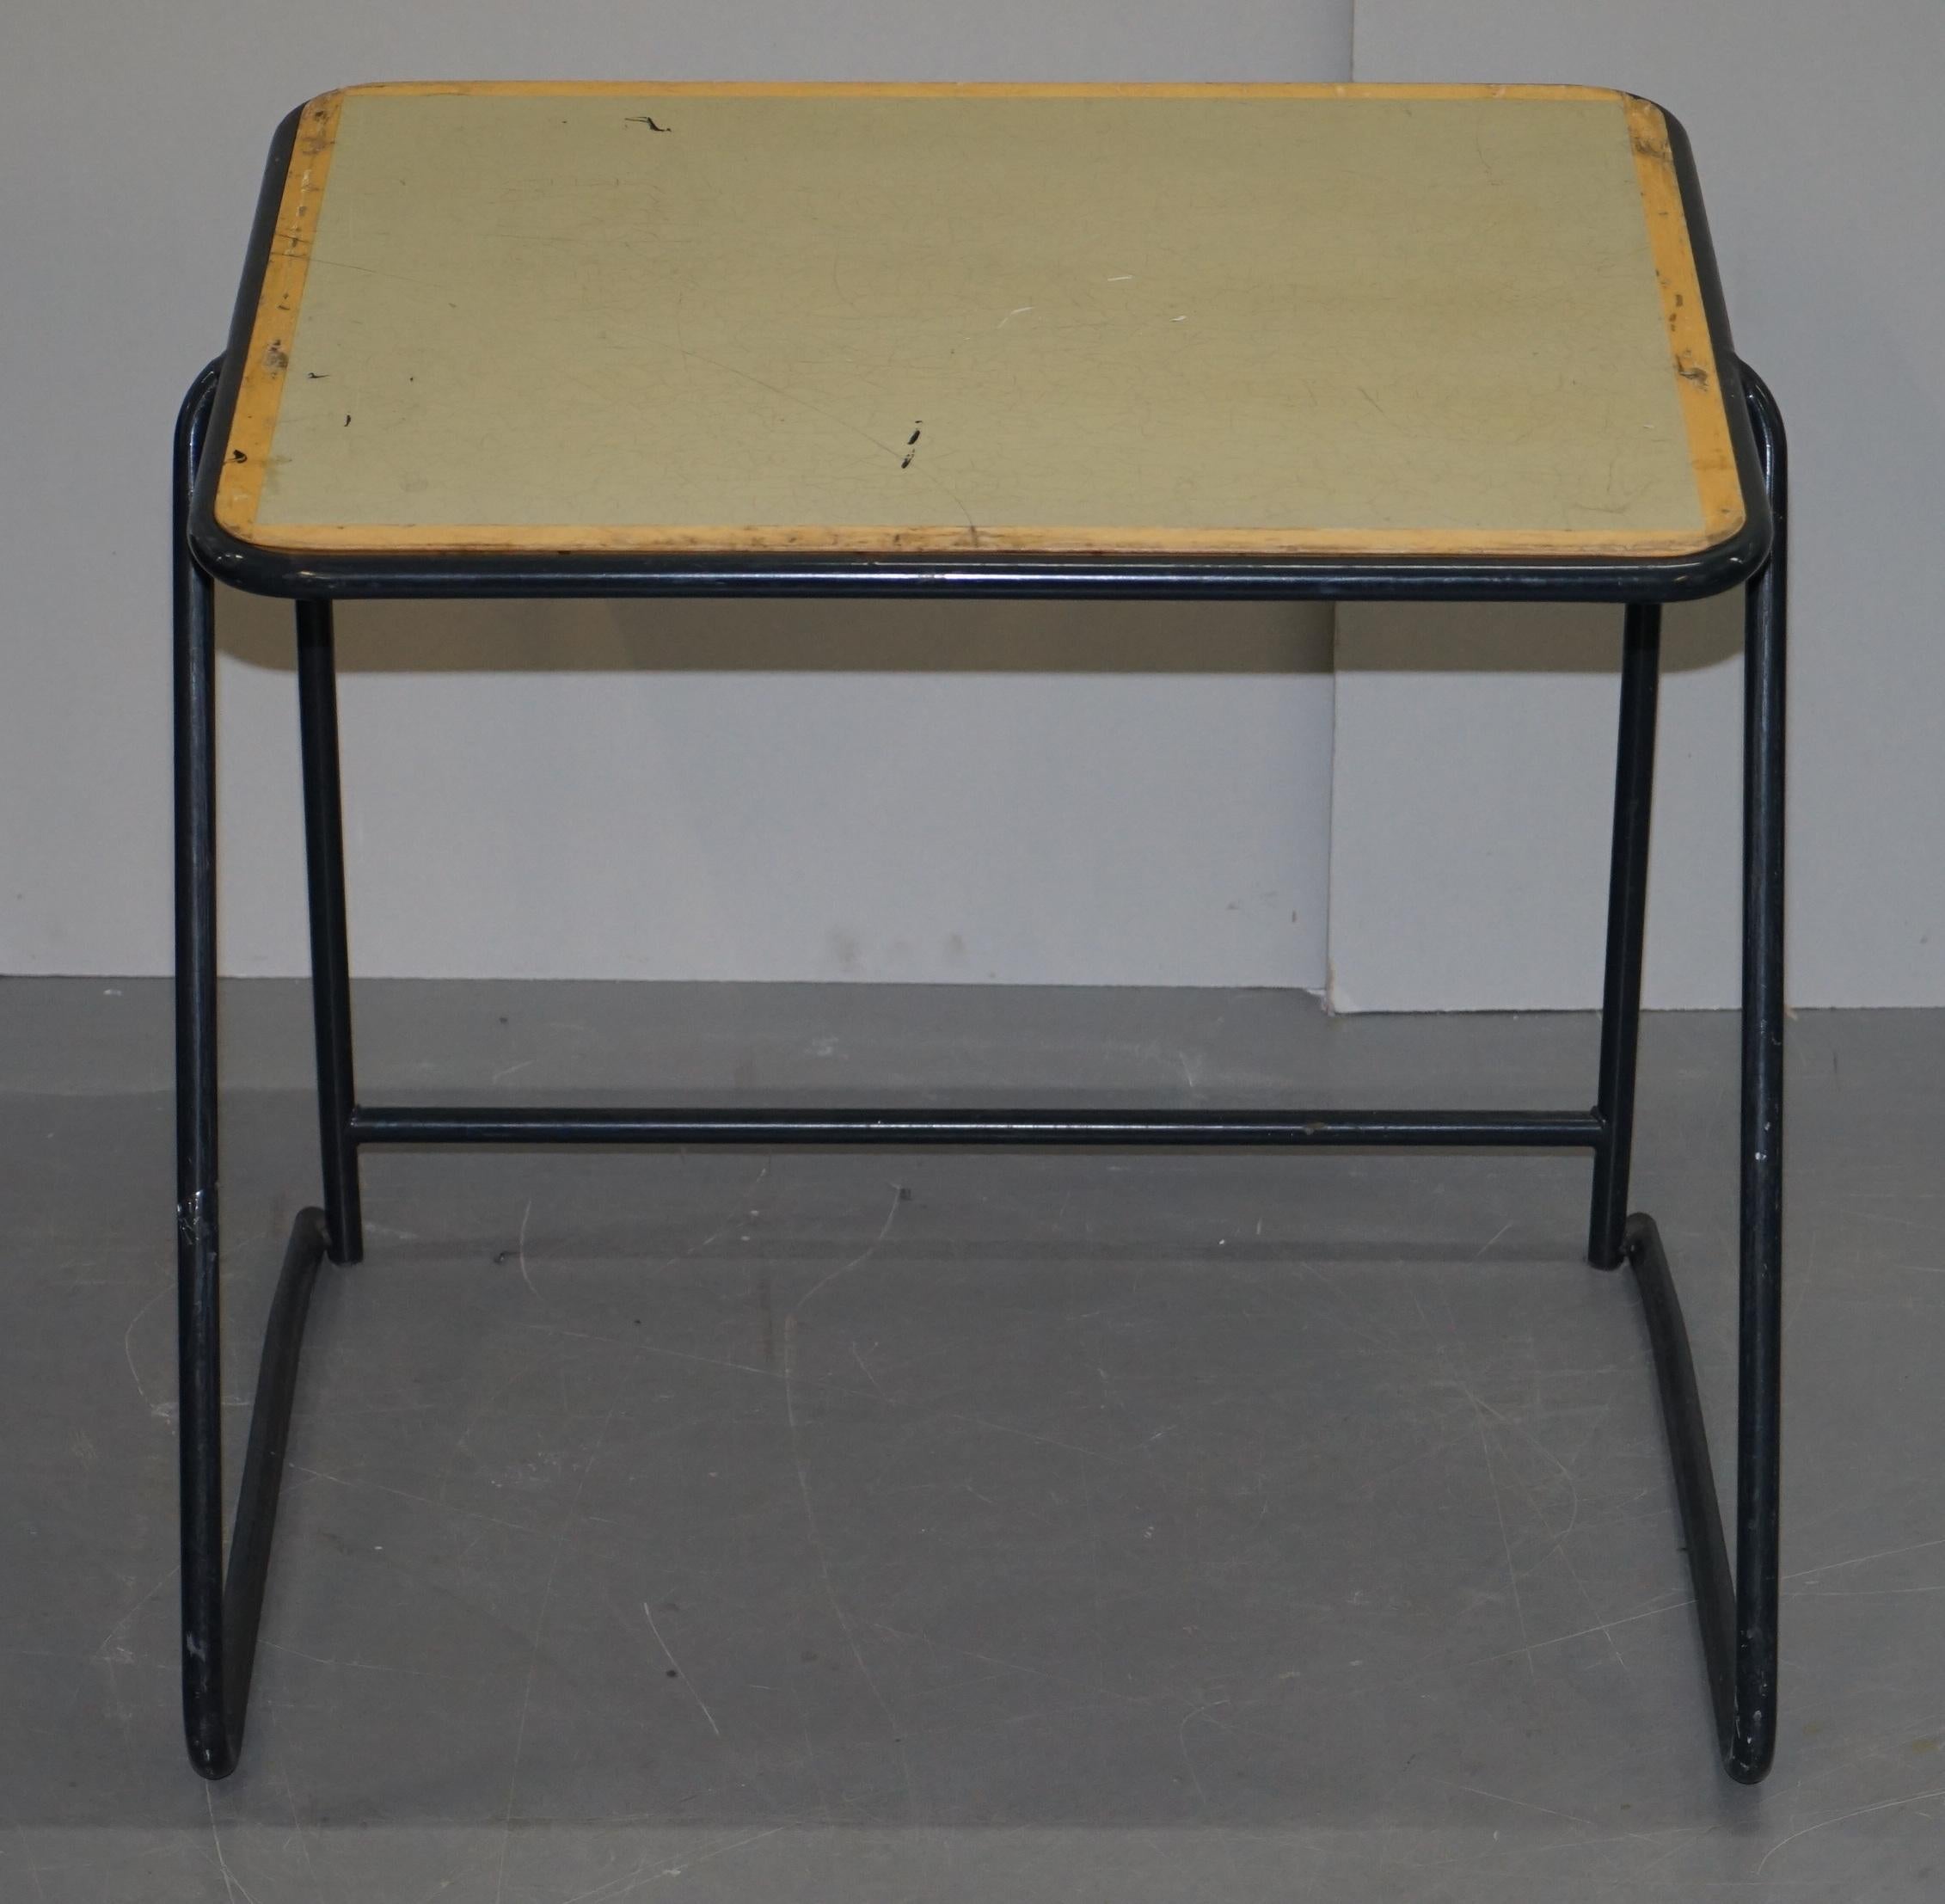 English 1 of 20 British Military Army Stacking Desk Tables Full Sized Stainless Steel For Sale